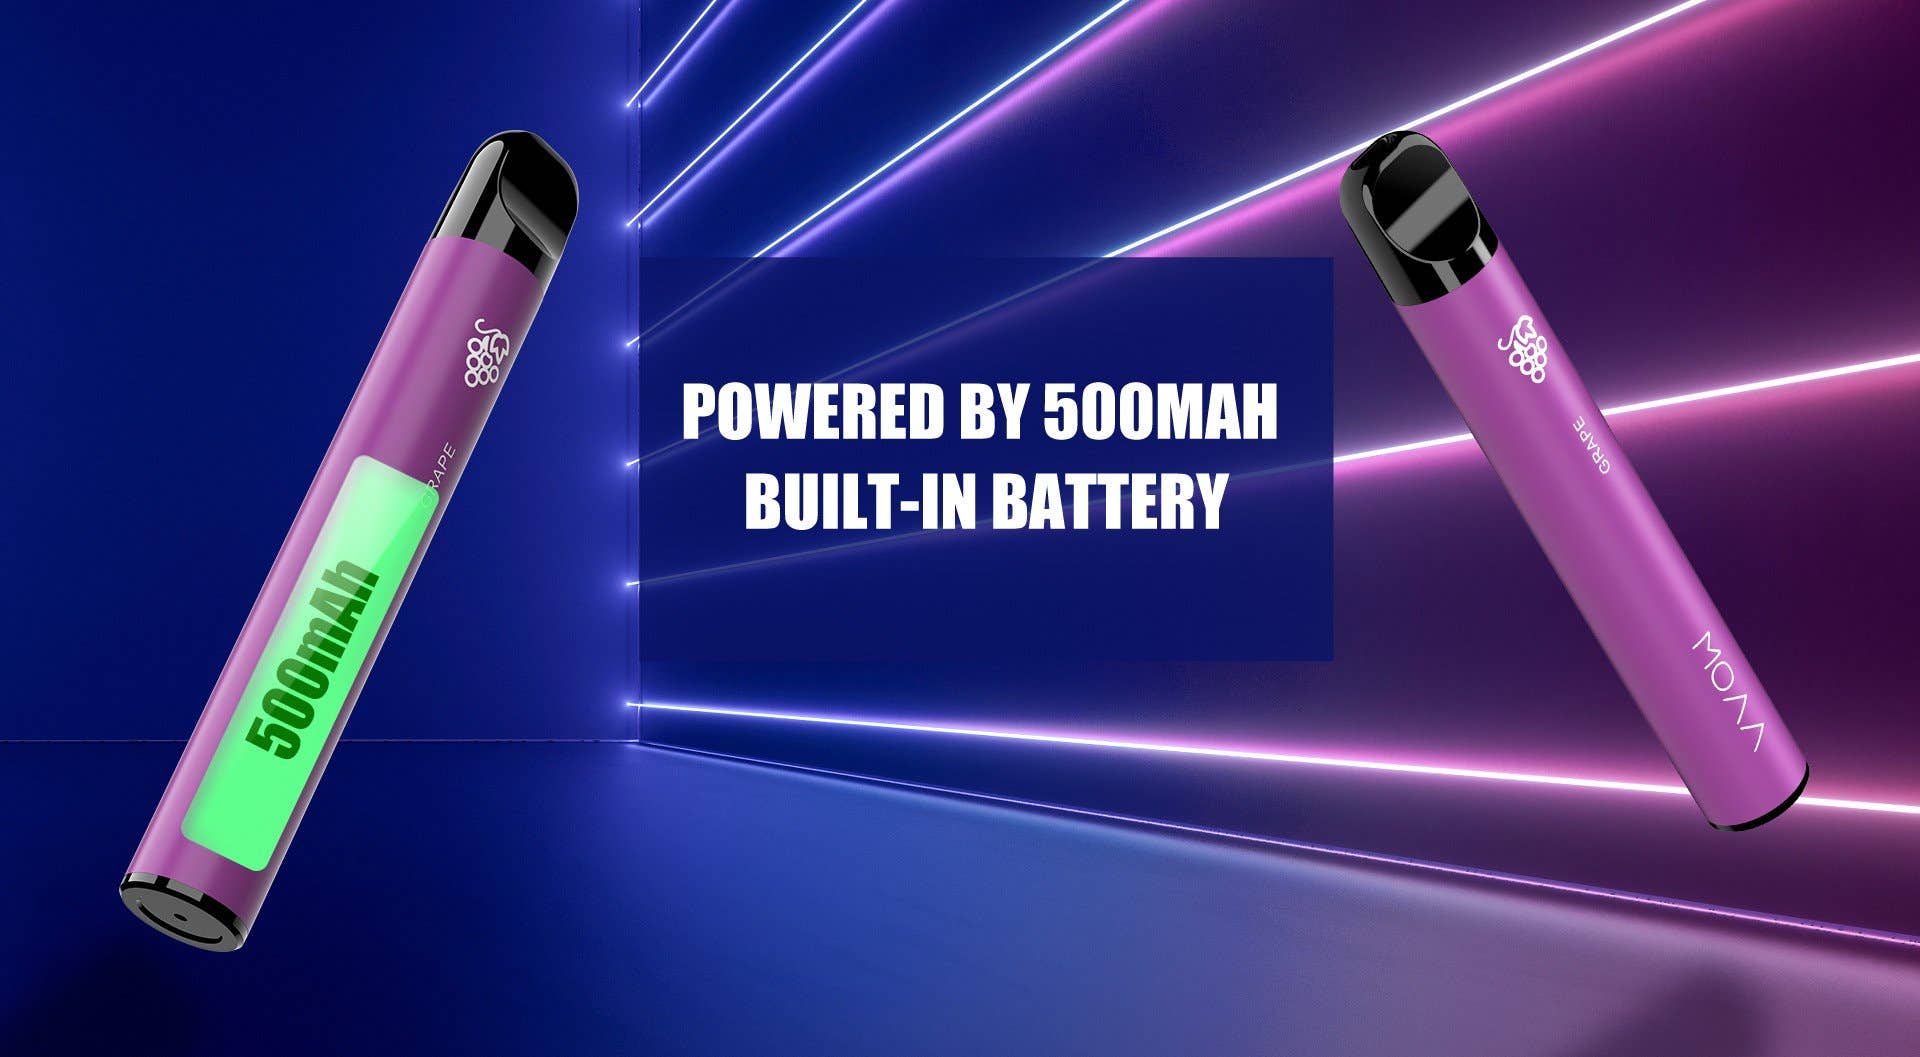 A 500mAh battery is fitted inside